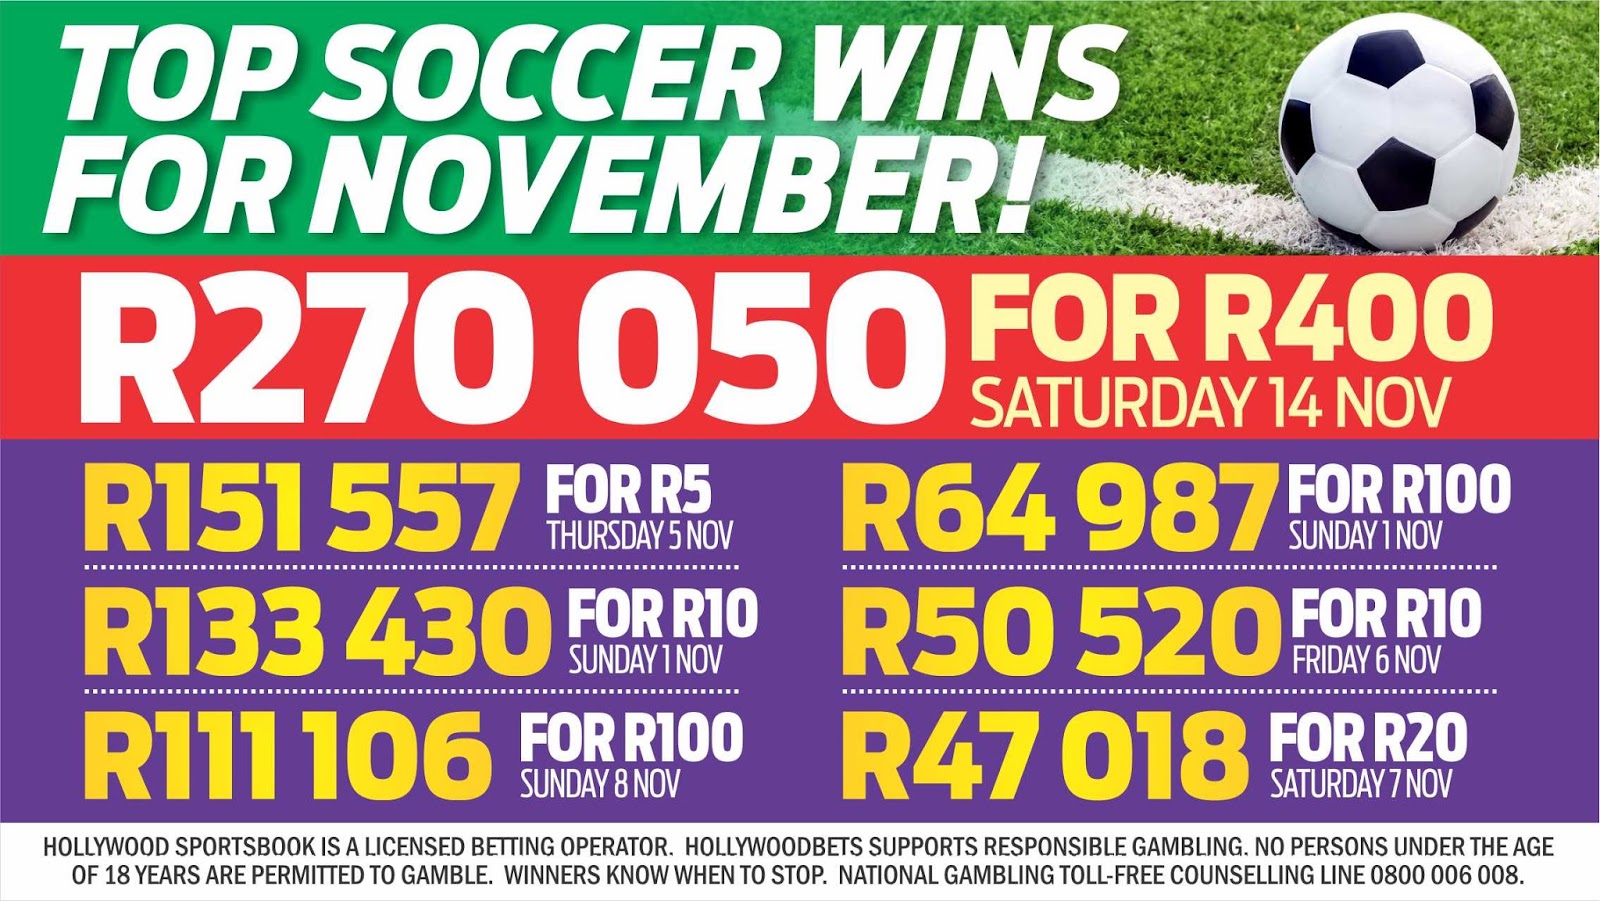 Hollywoodbets Top Soccer Wins Betting November 11